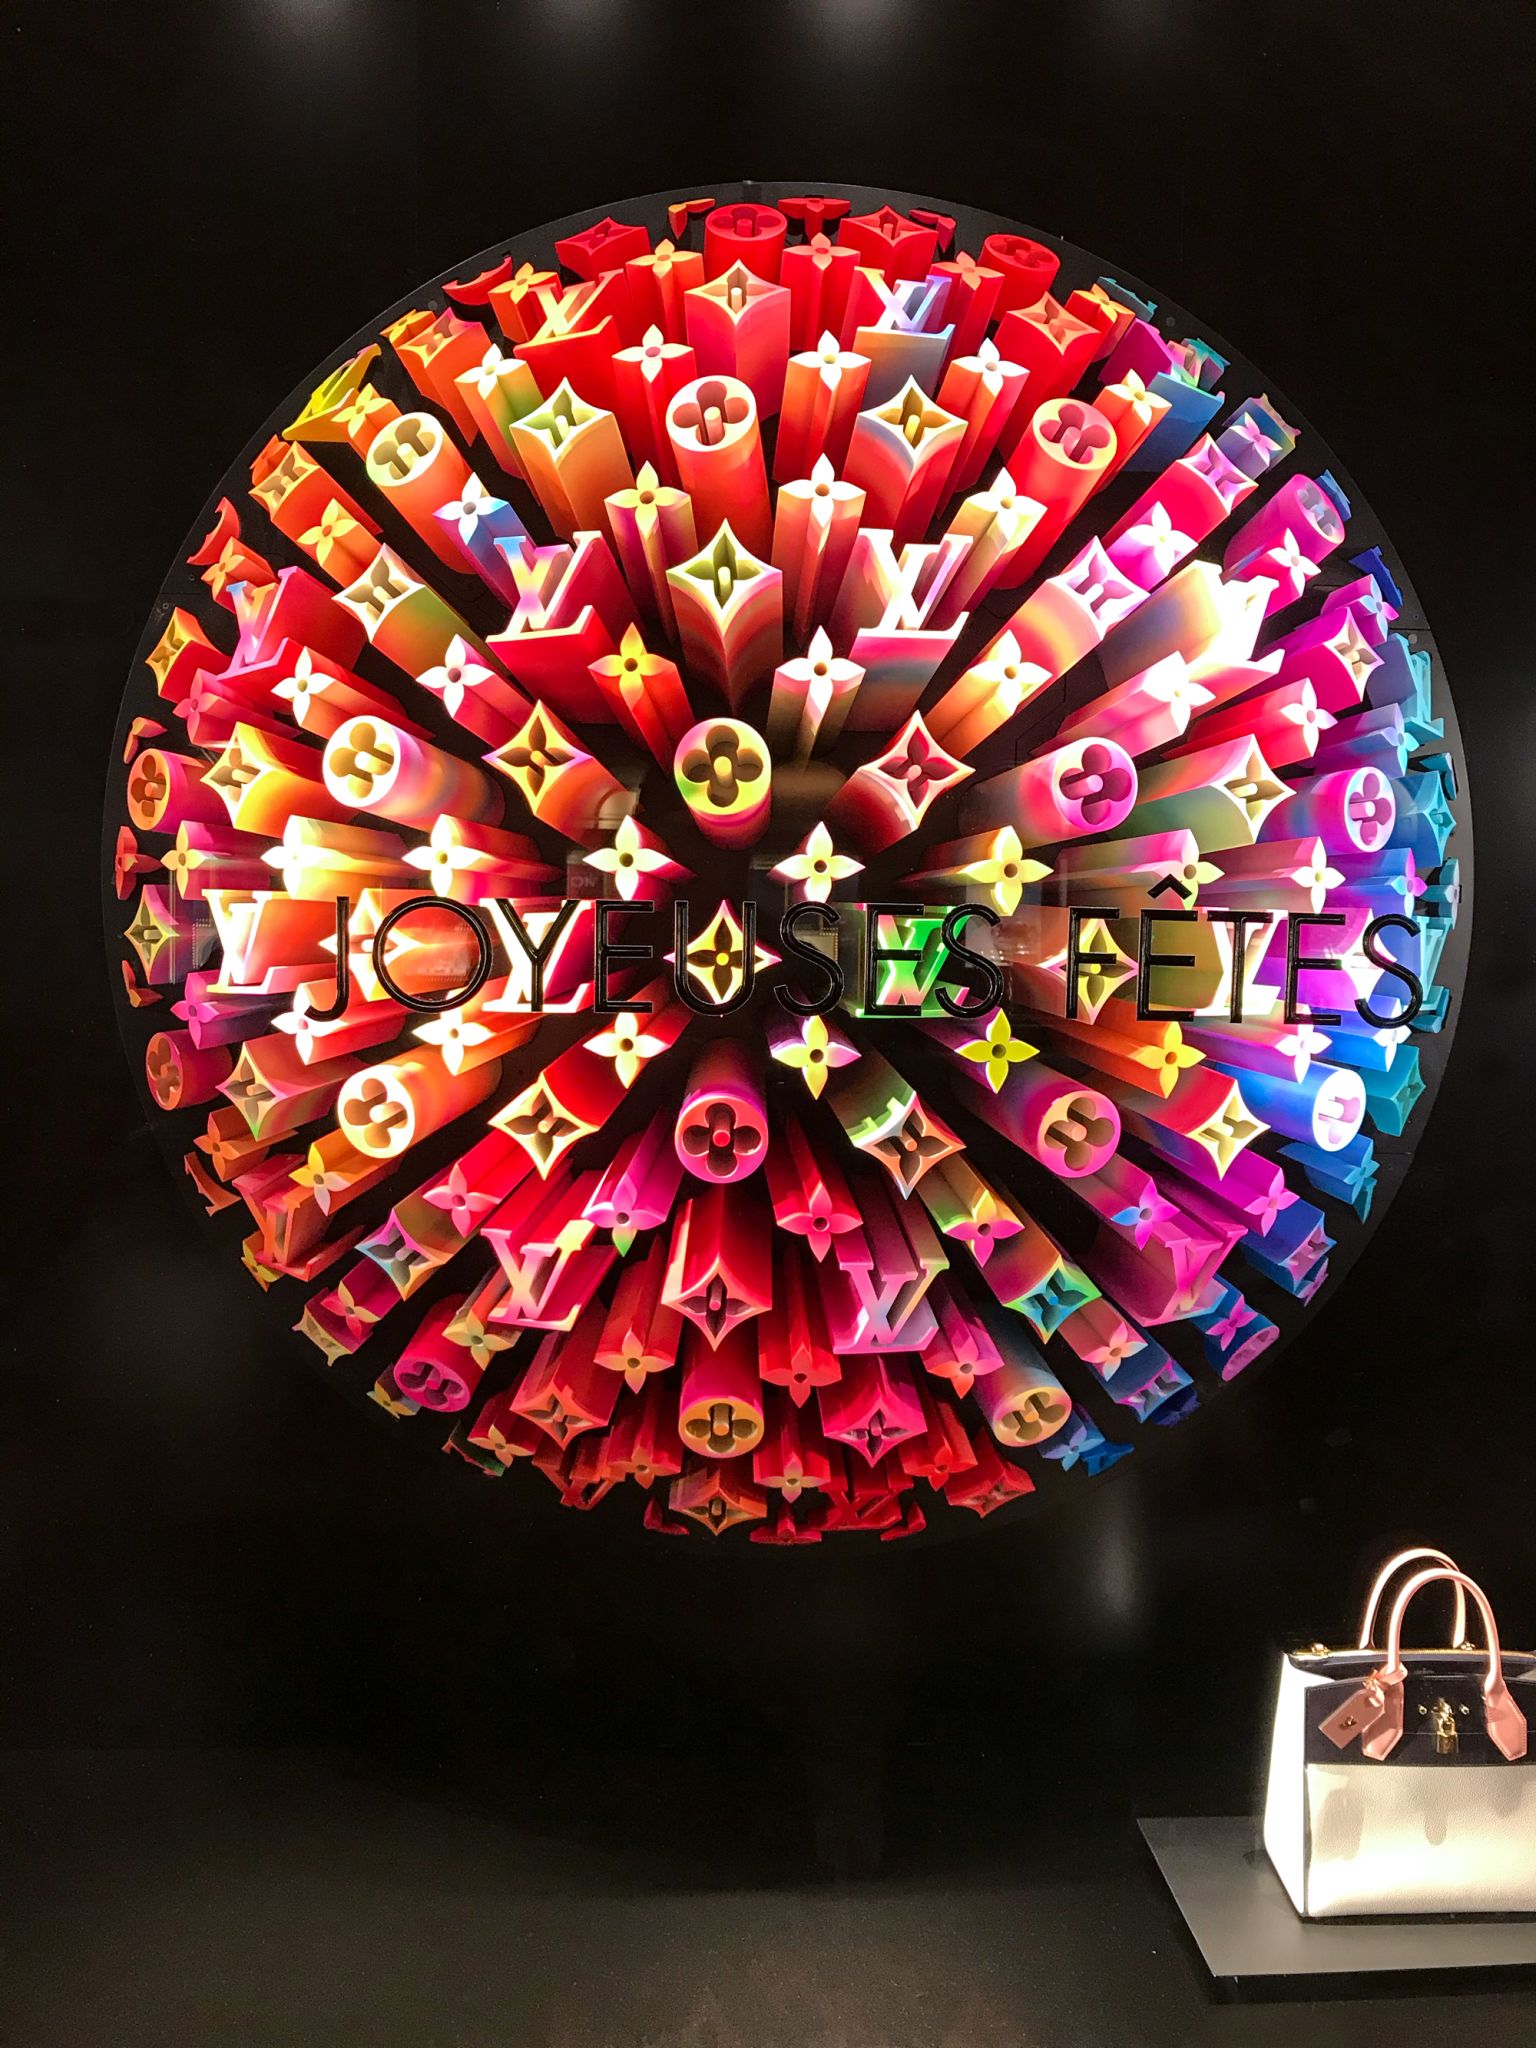 Louis Vuitton colourful window display in the Zurich